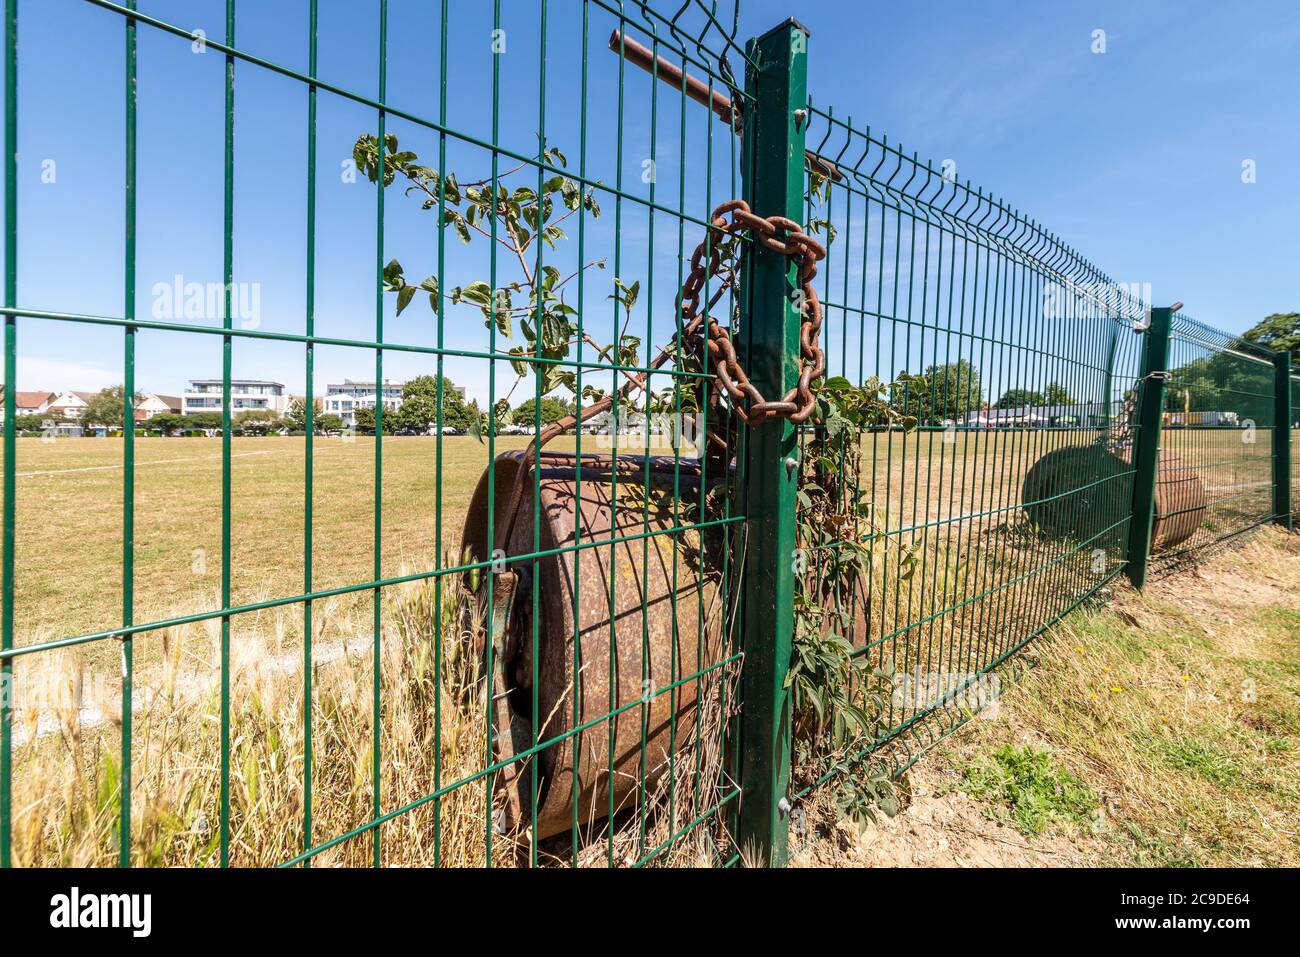 Chalkwell Park in Westcliff on Sea, Southend, Essex, UK. Southend on Sea Borough Council green space in an urban area.Cricket pitch rollers chained up Stock Photo